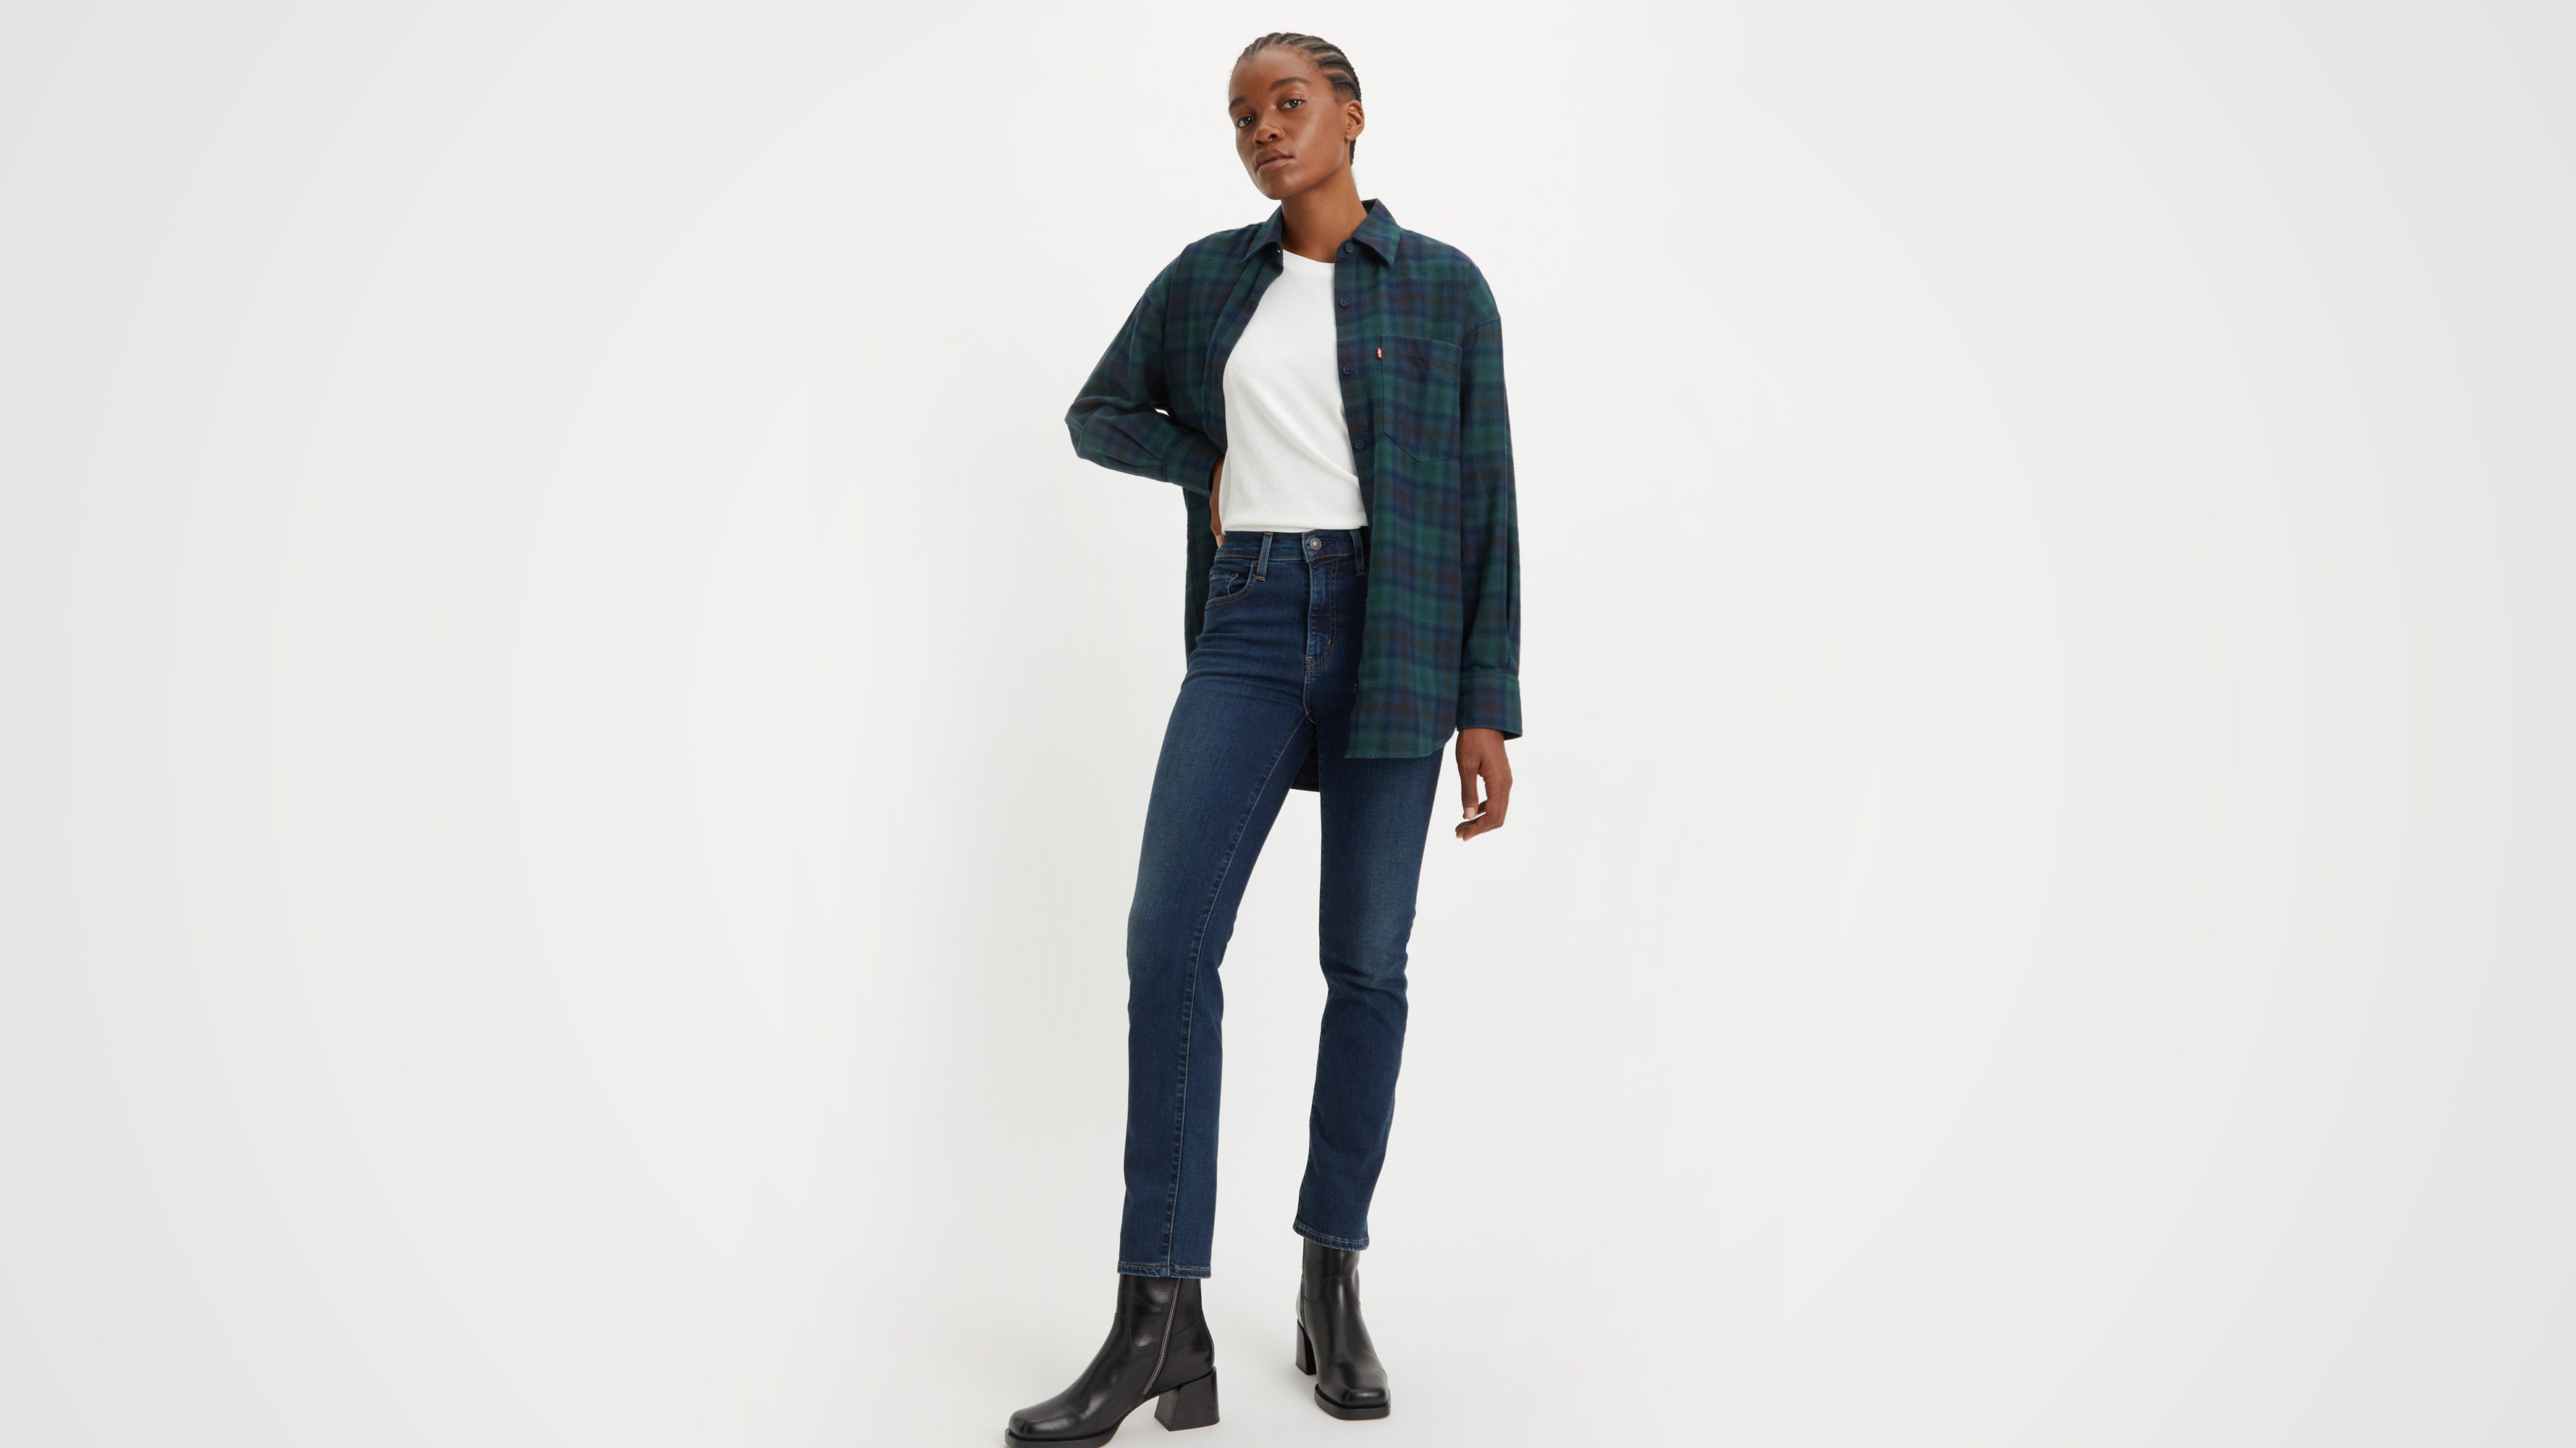 724™ High Rise Straight Jeans - Blue | Levi's® GB